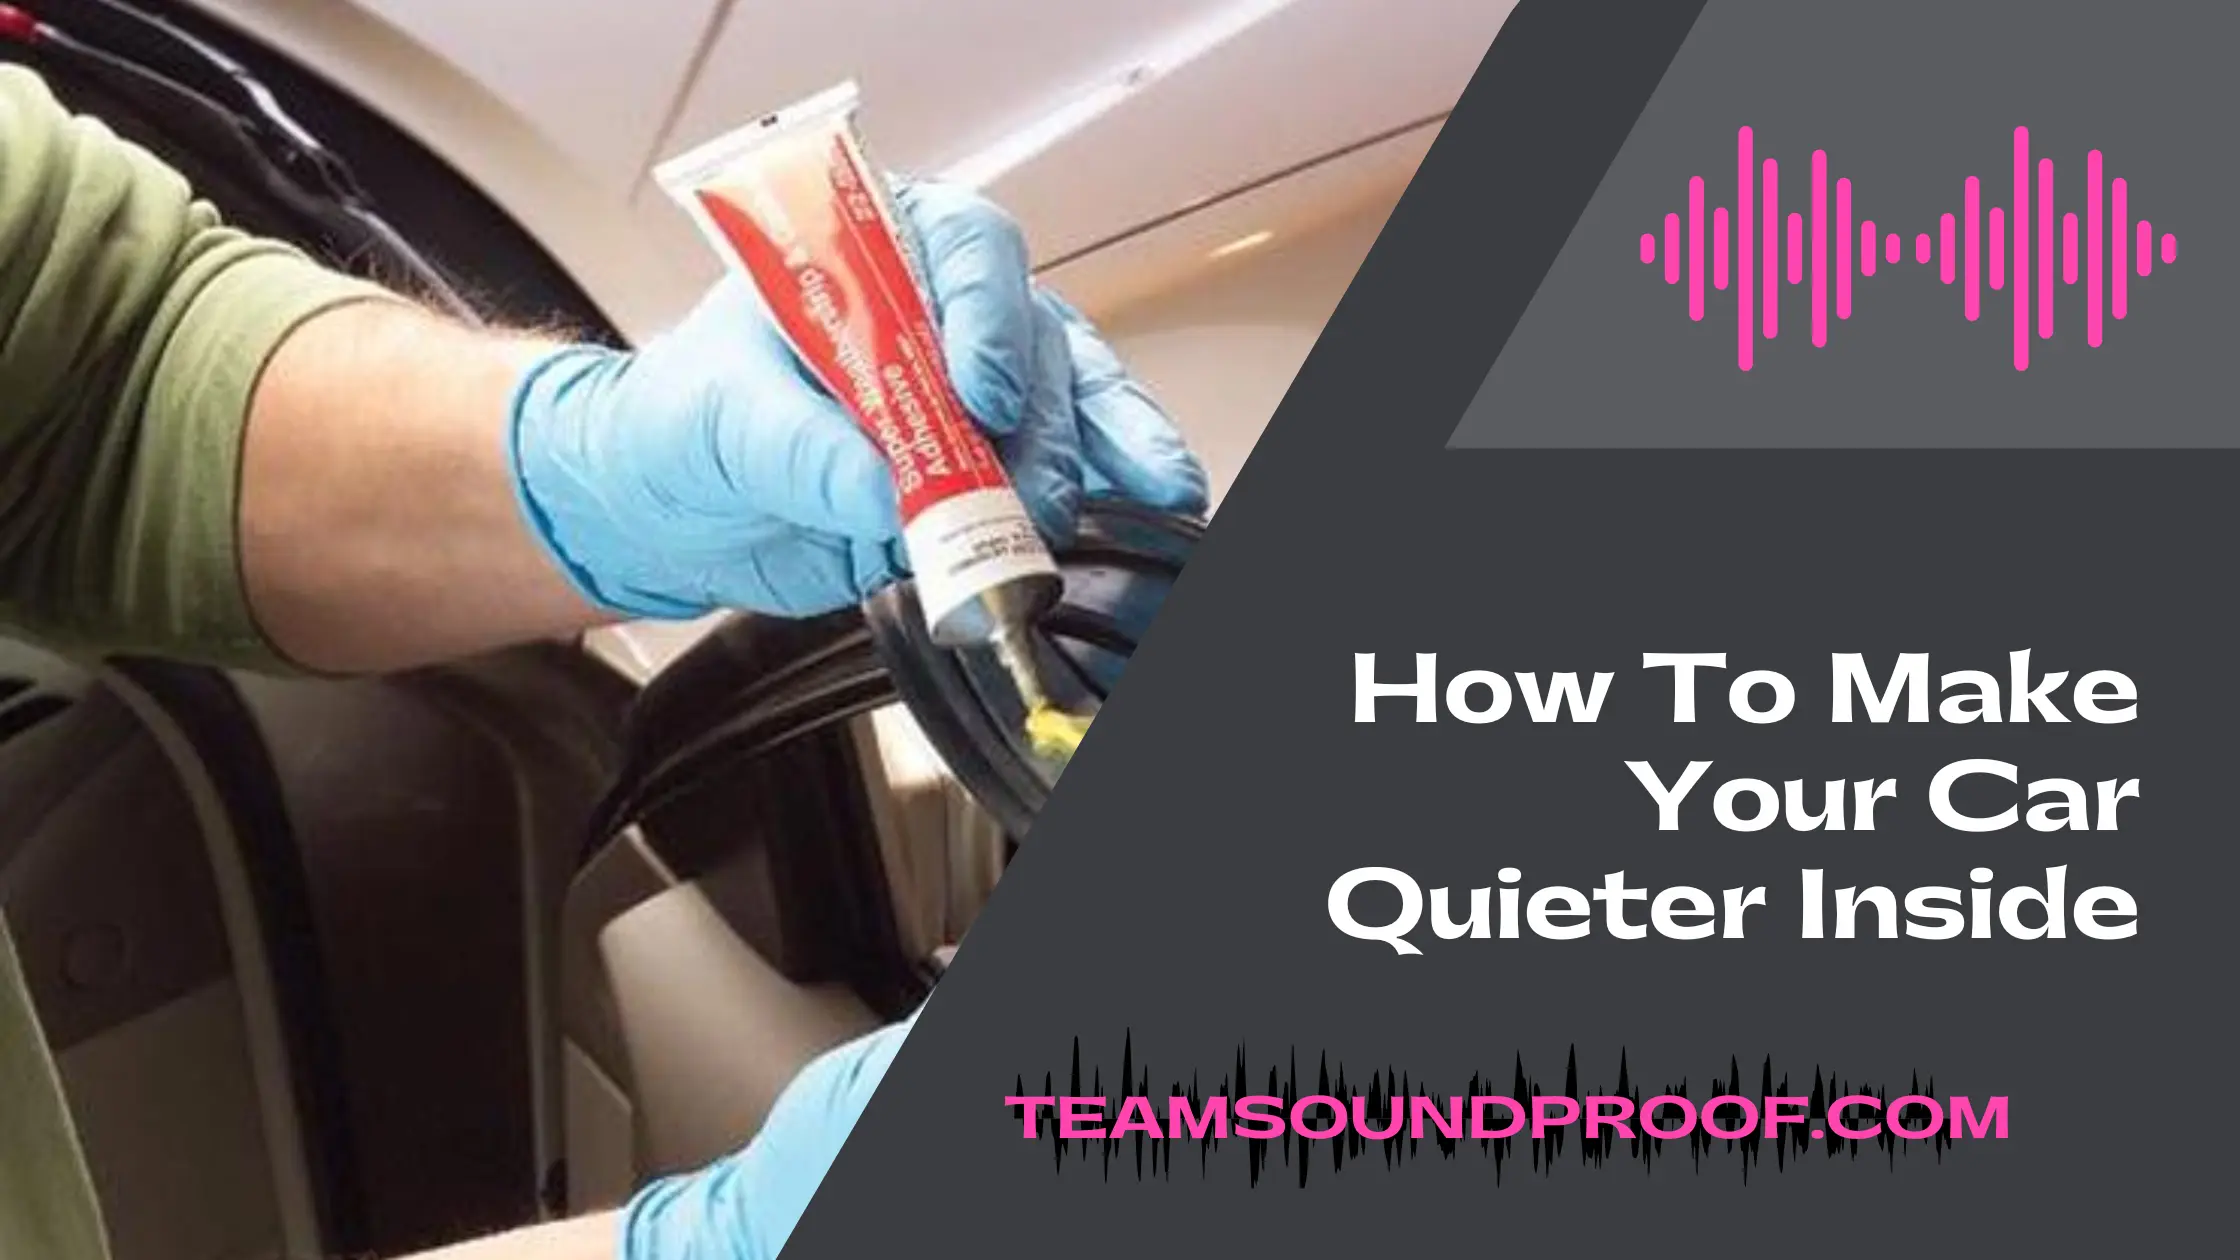 How To Make Your Car Quieter Inside